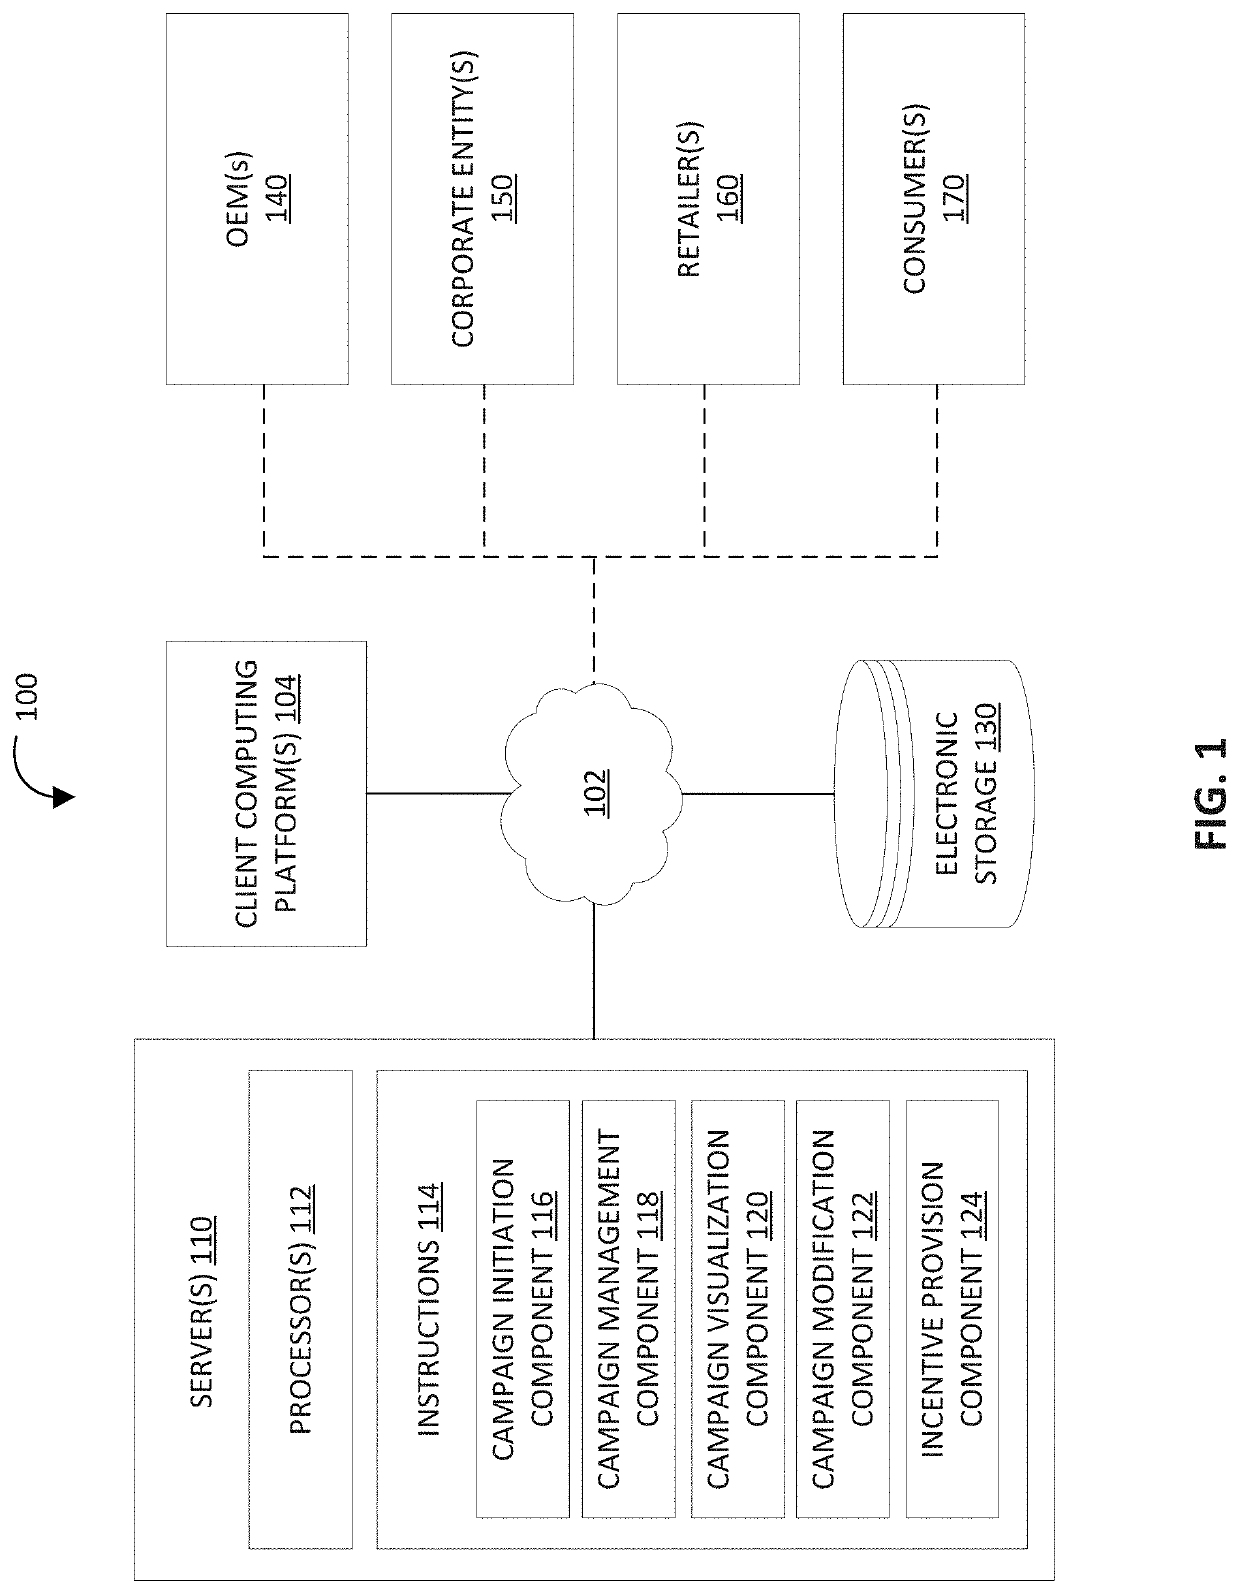 Systems and methods for managing incentive campaigns and automatically approving requests for incentives